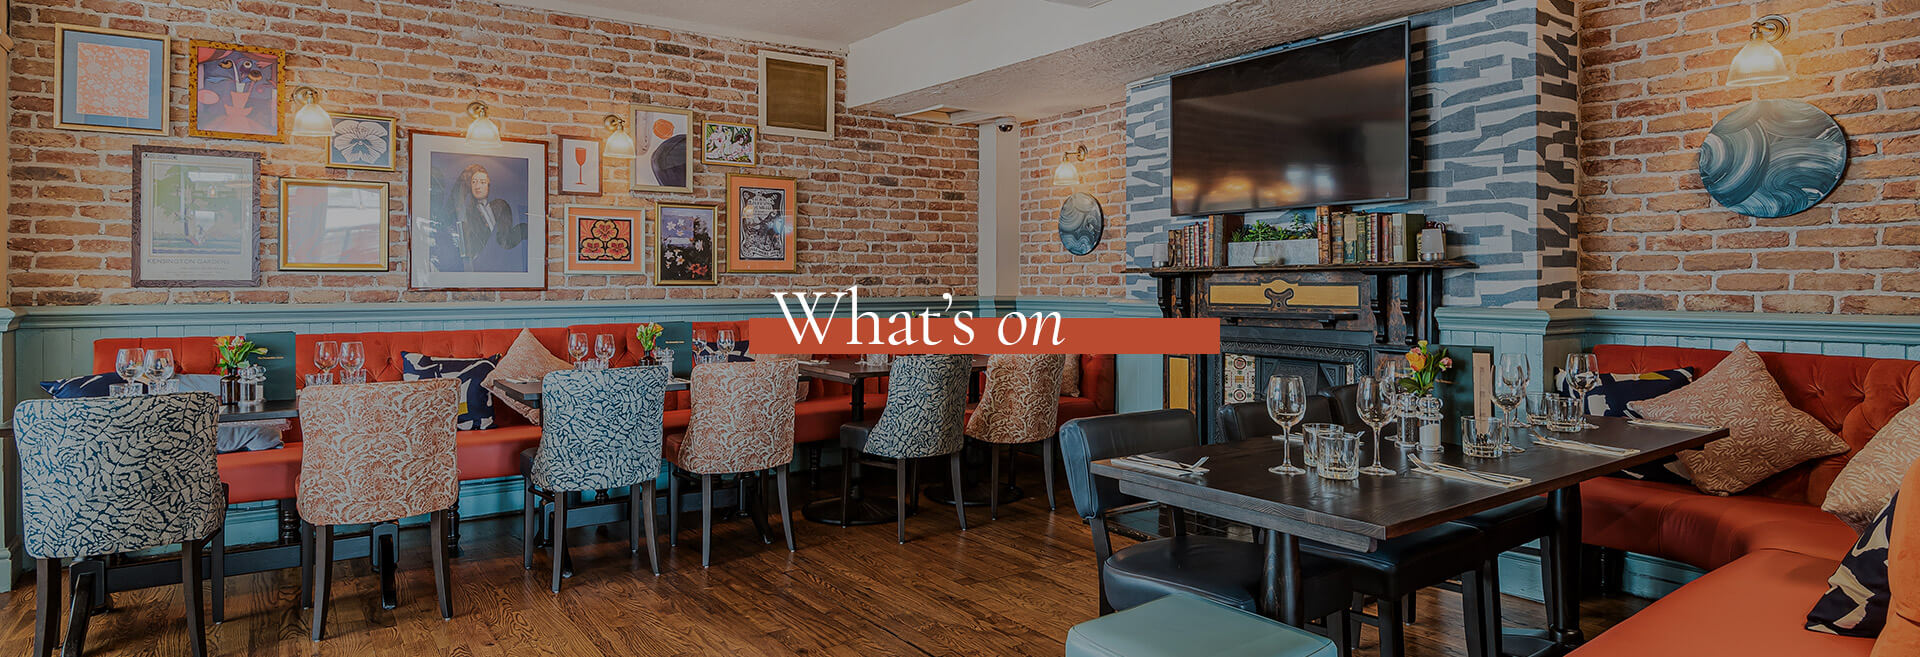 What's On at The Devonshire Arms